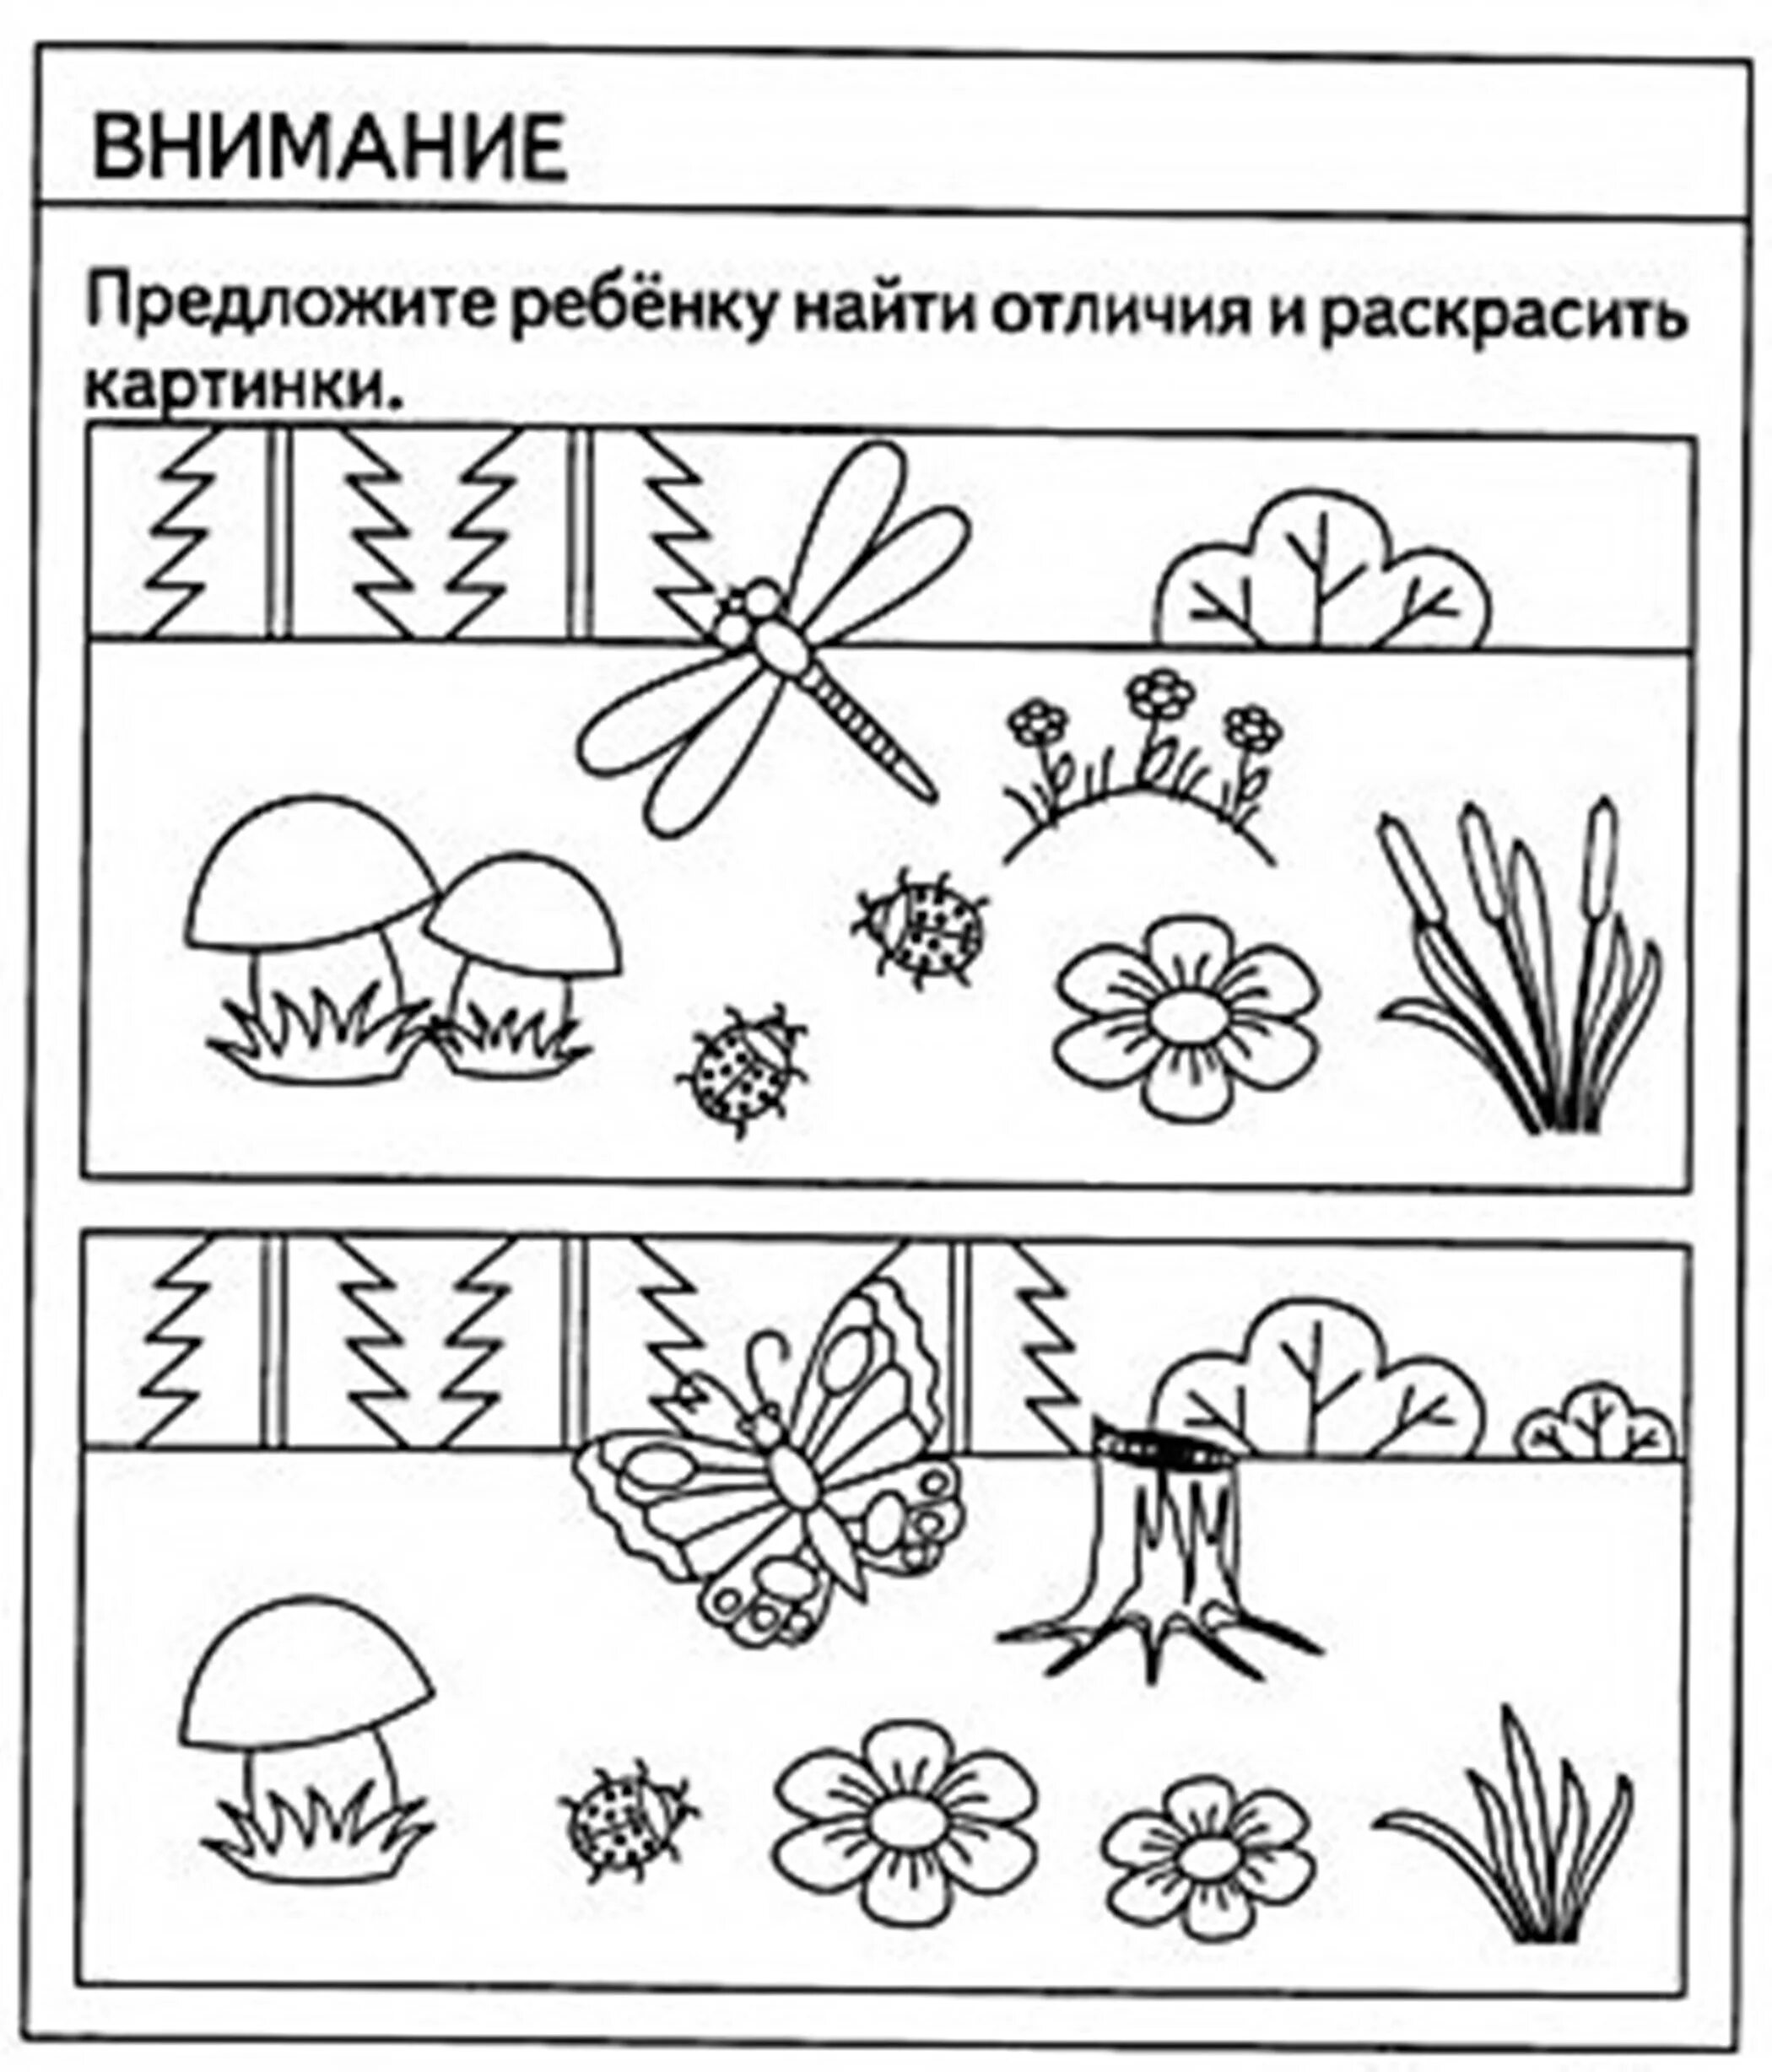 Creative coloring book to develop attention